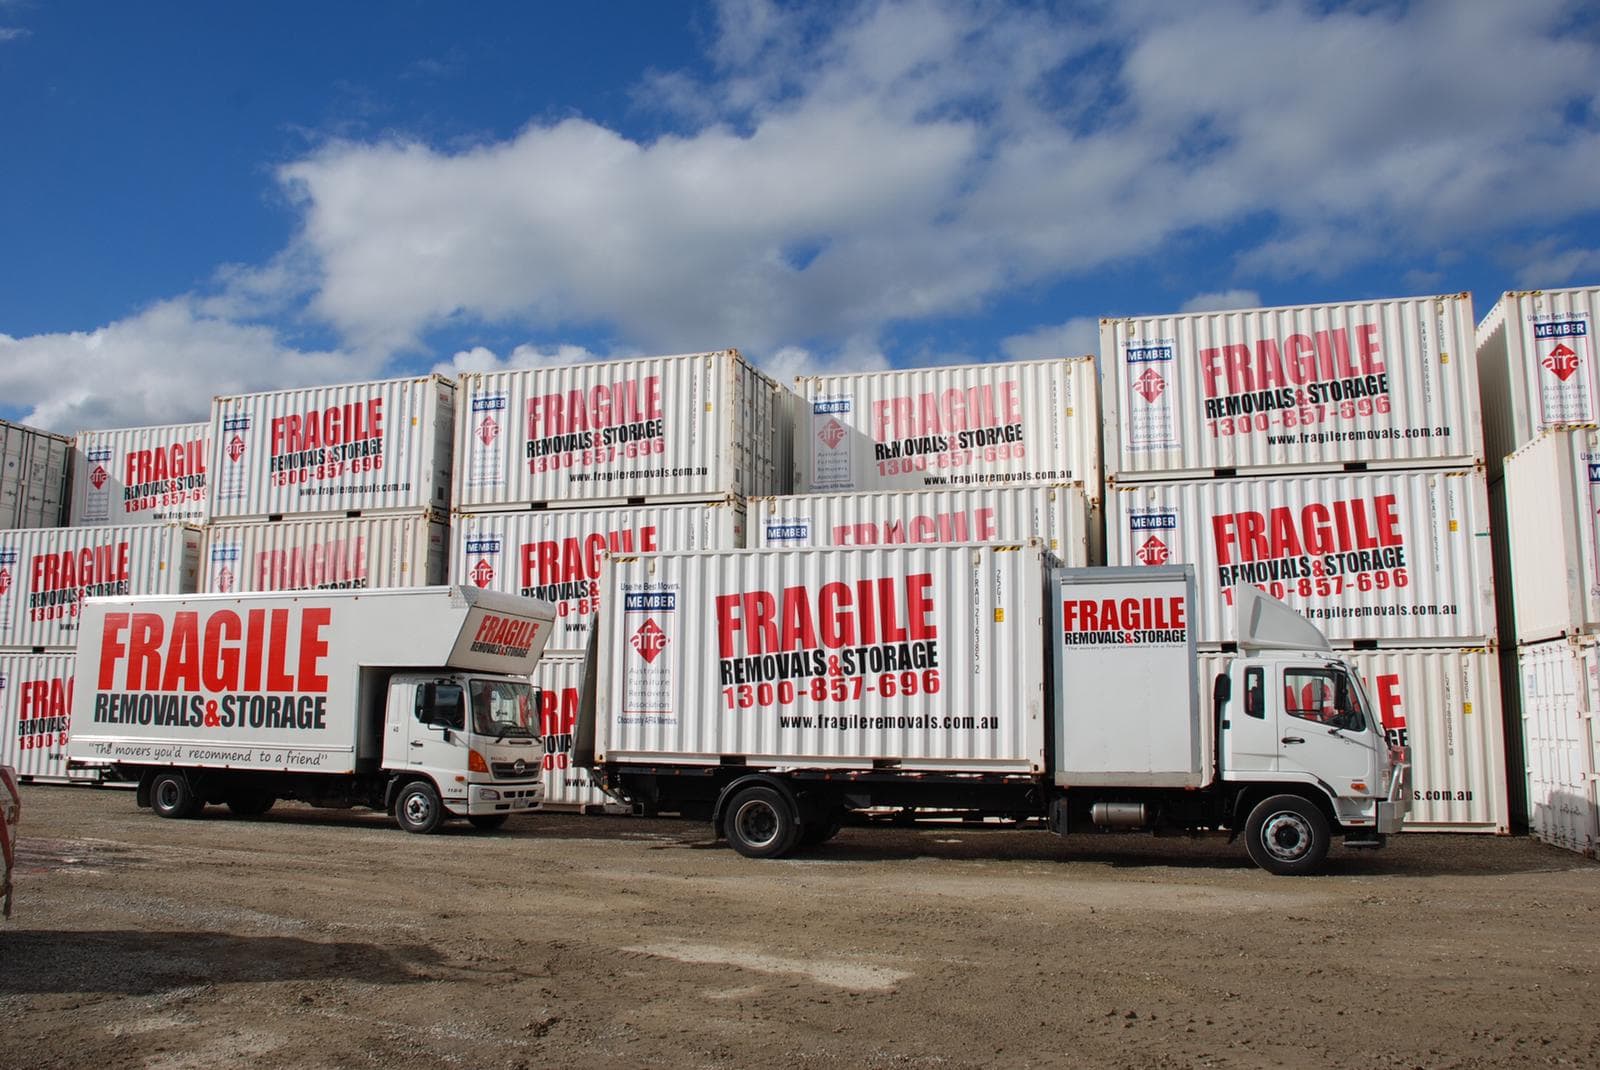 Fragile Removals - Dandenong South, AU, removalists